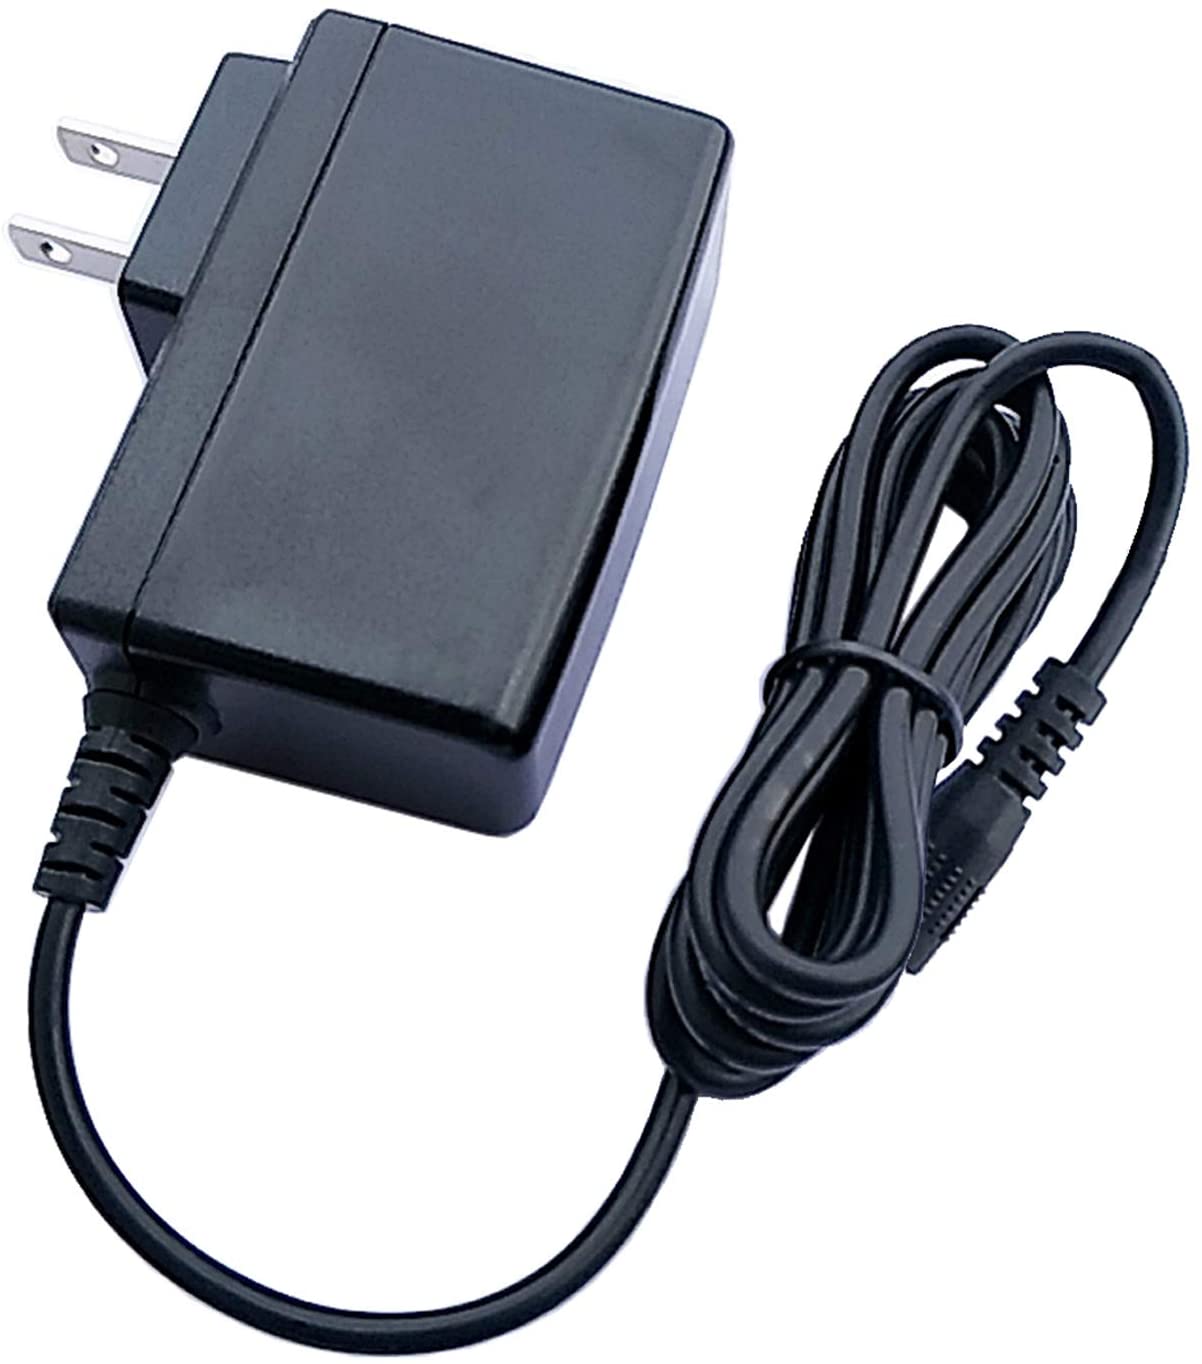 UPBRIGHT Adapter For DigiTech JamMan Solo Looper Guitar Effects Pedal Power Supply Cord Charger PSU - image 2 of 5